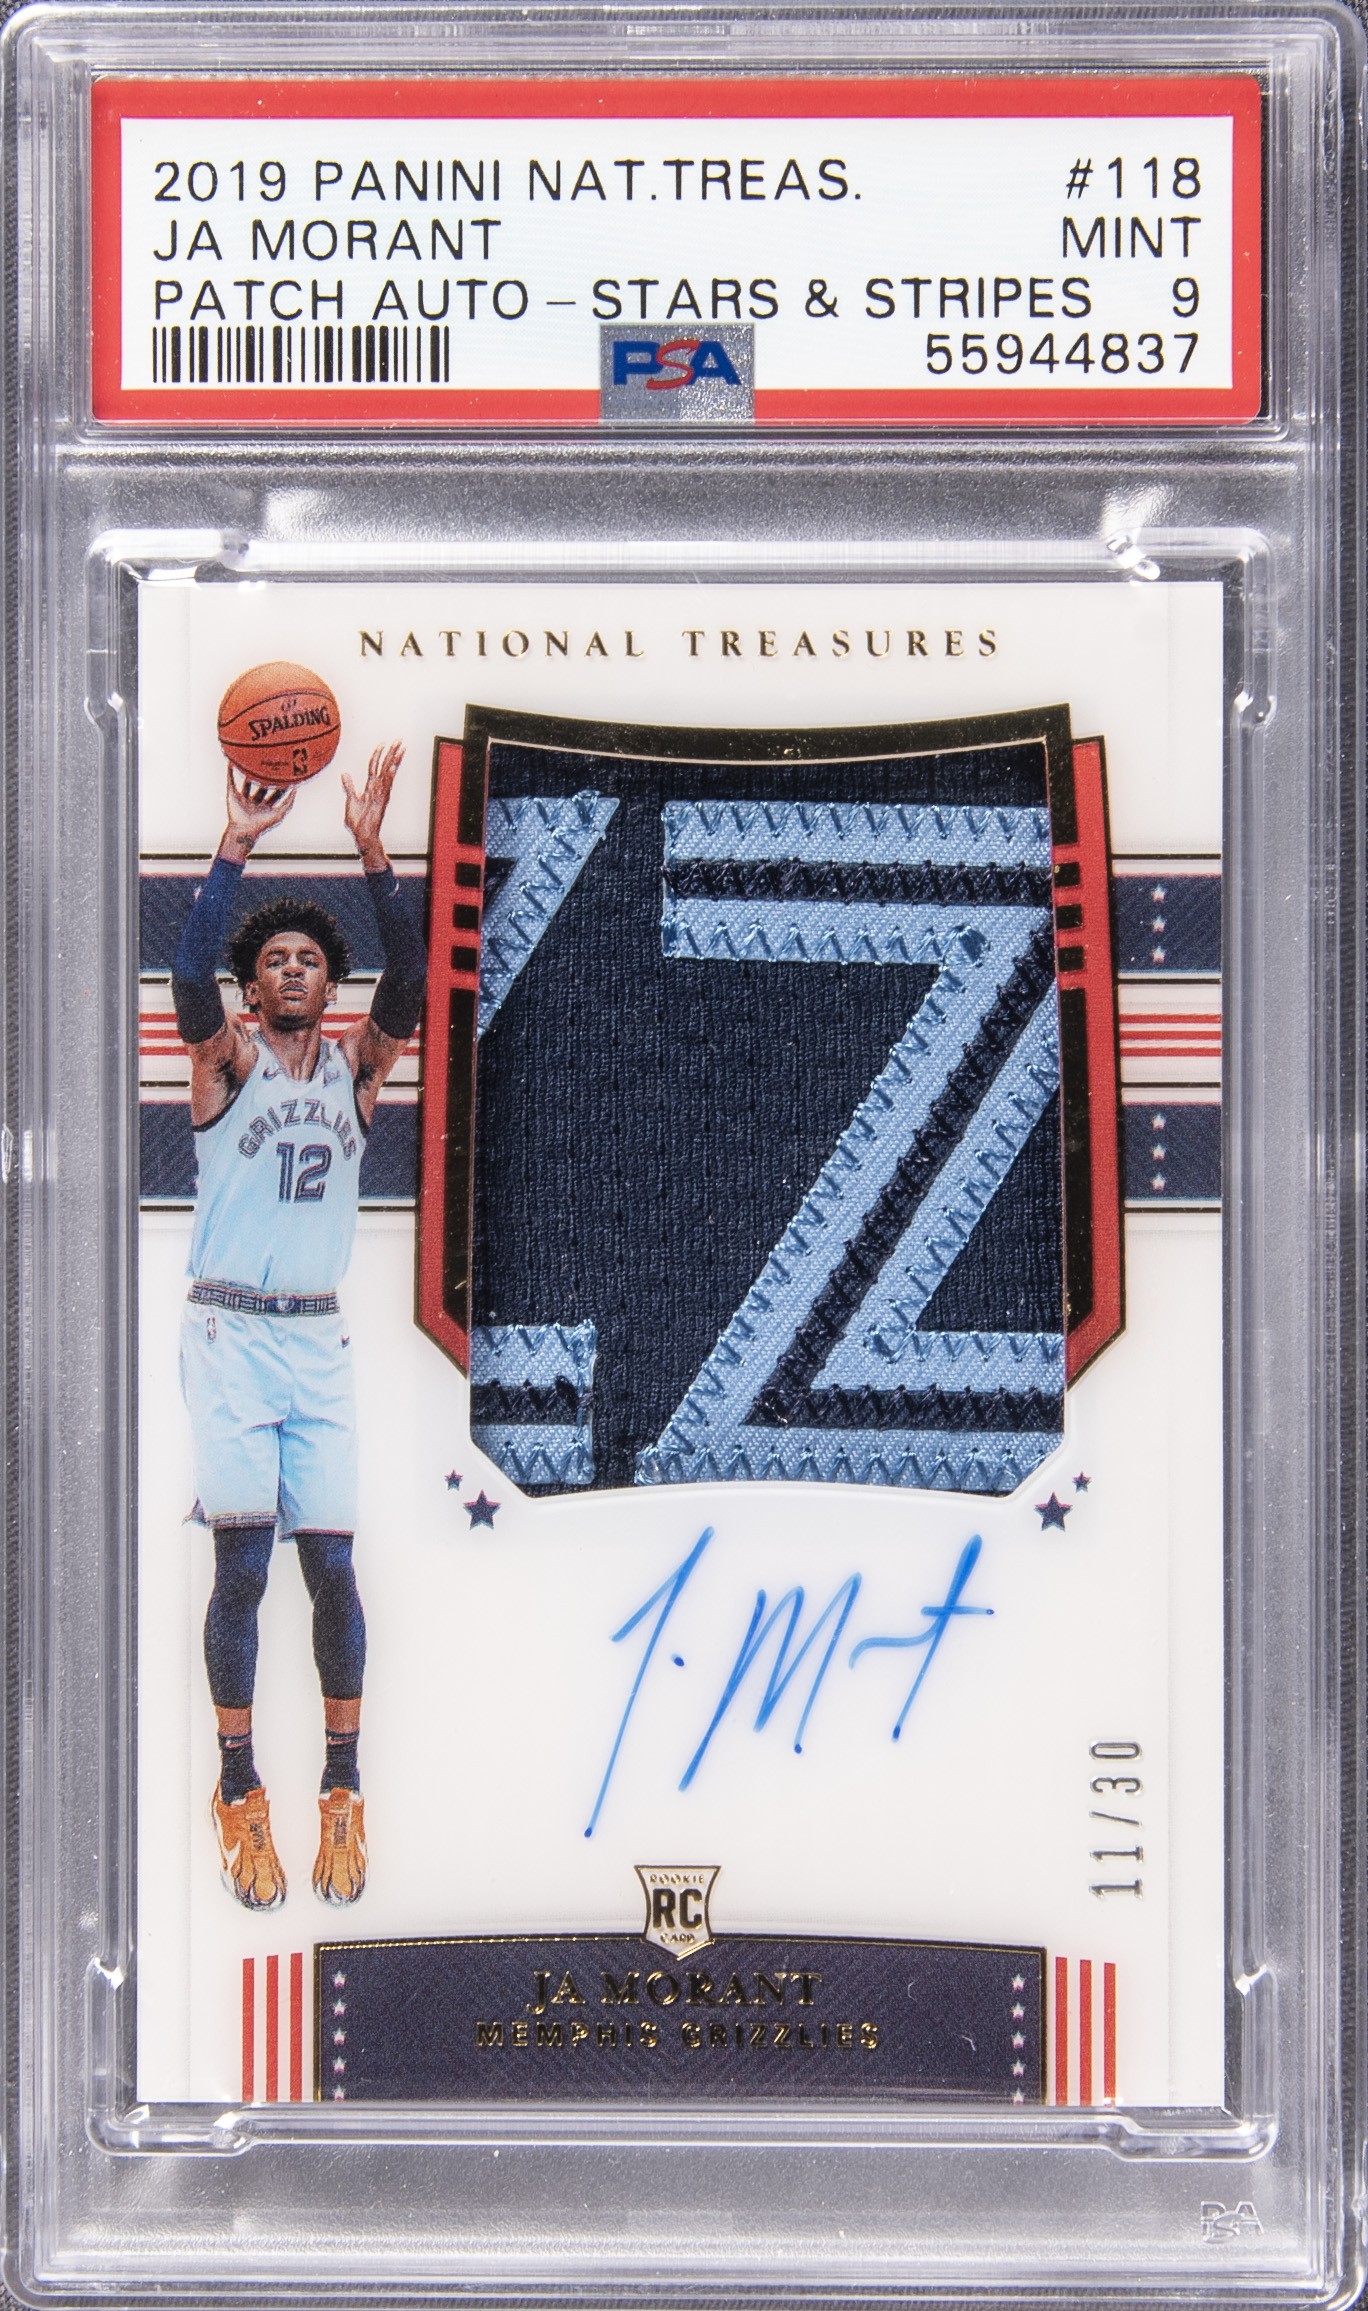 2019-20 Panini National Treasures Rookie Patch Autograph (RPA) Stars & Stripes #118 Ja Morant Signed Patch Rookie Card (#11/30) - PSA MINT 9